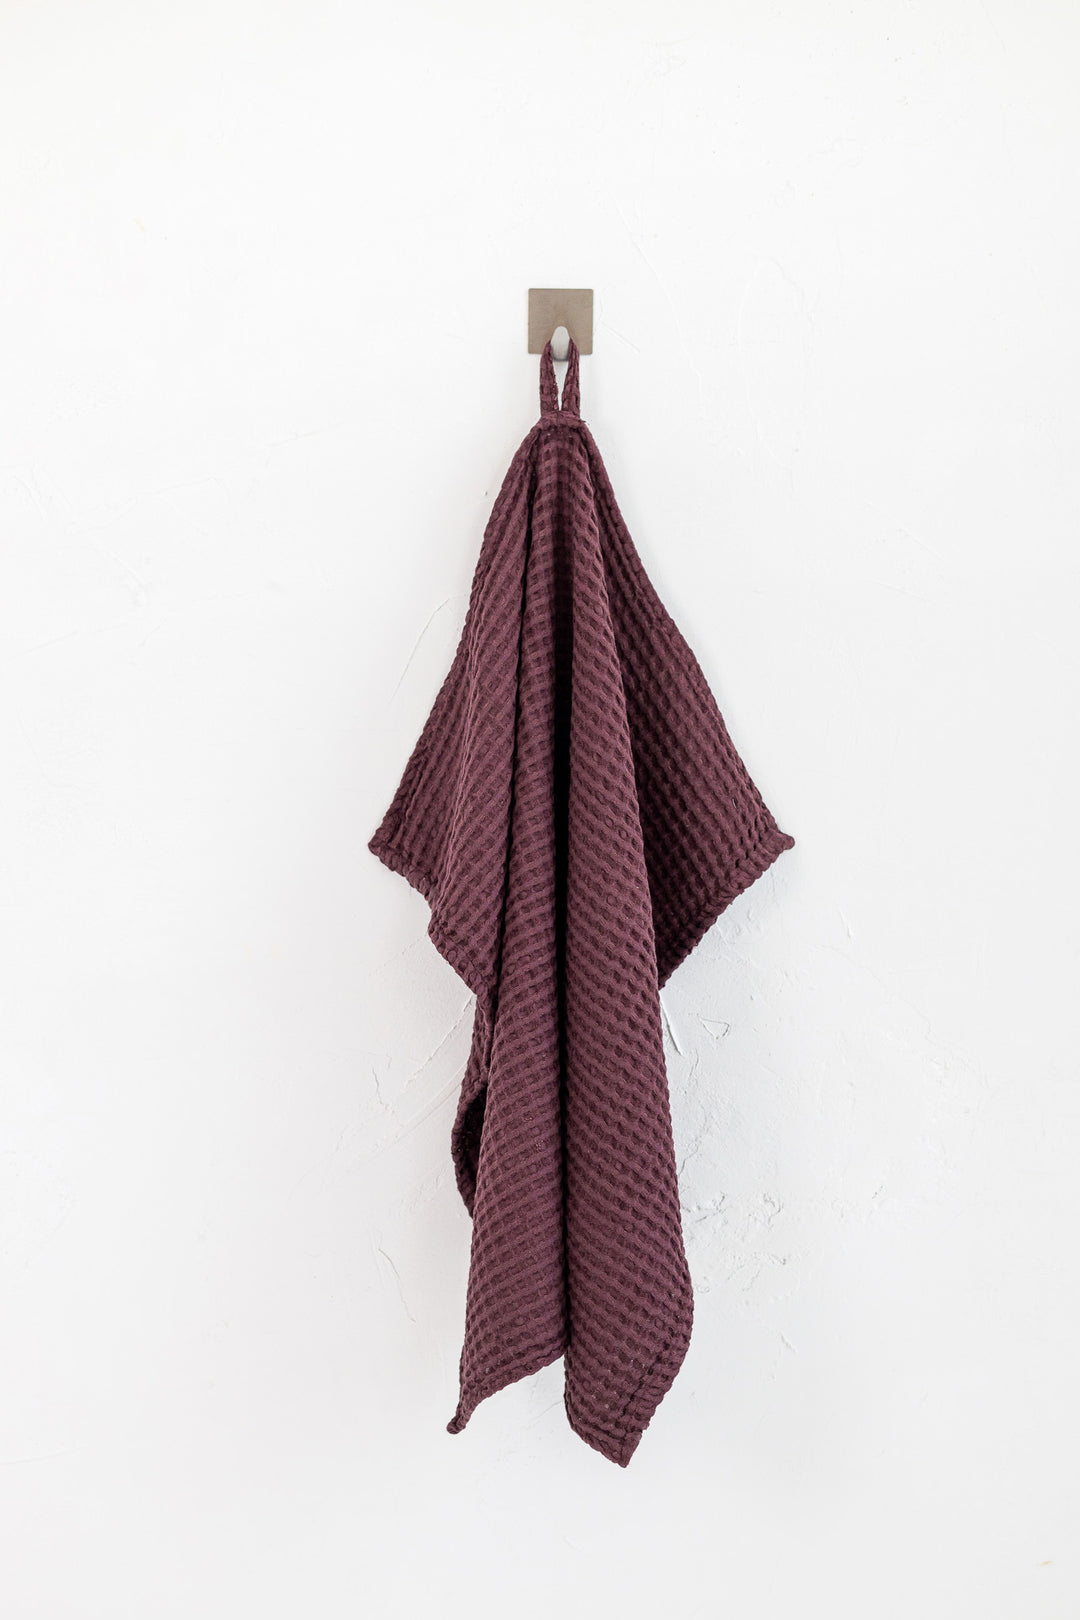 Hanging Linen Waffle Kitchen Towel In Red Wine Color - Daily Linen